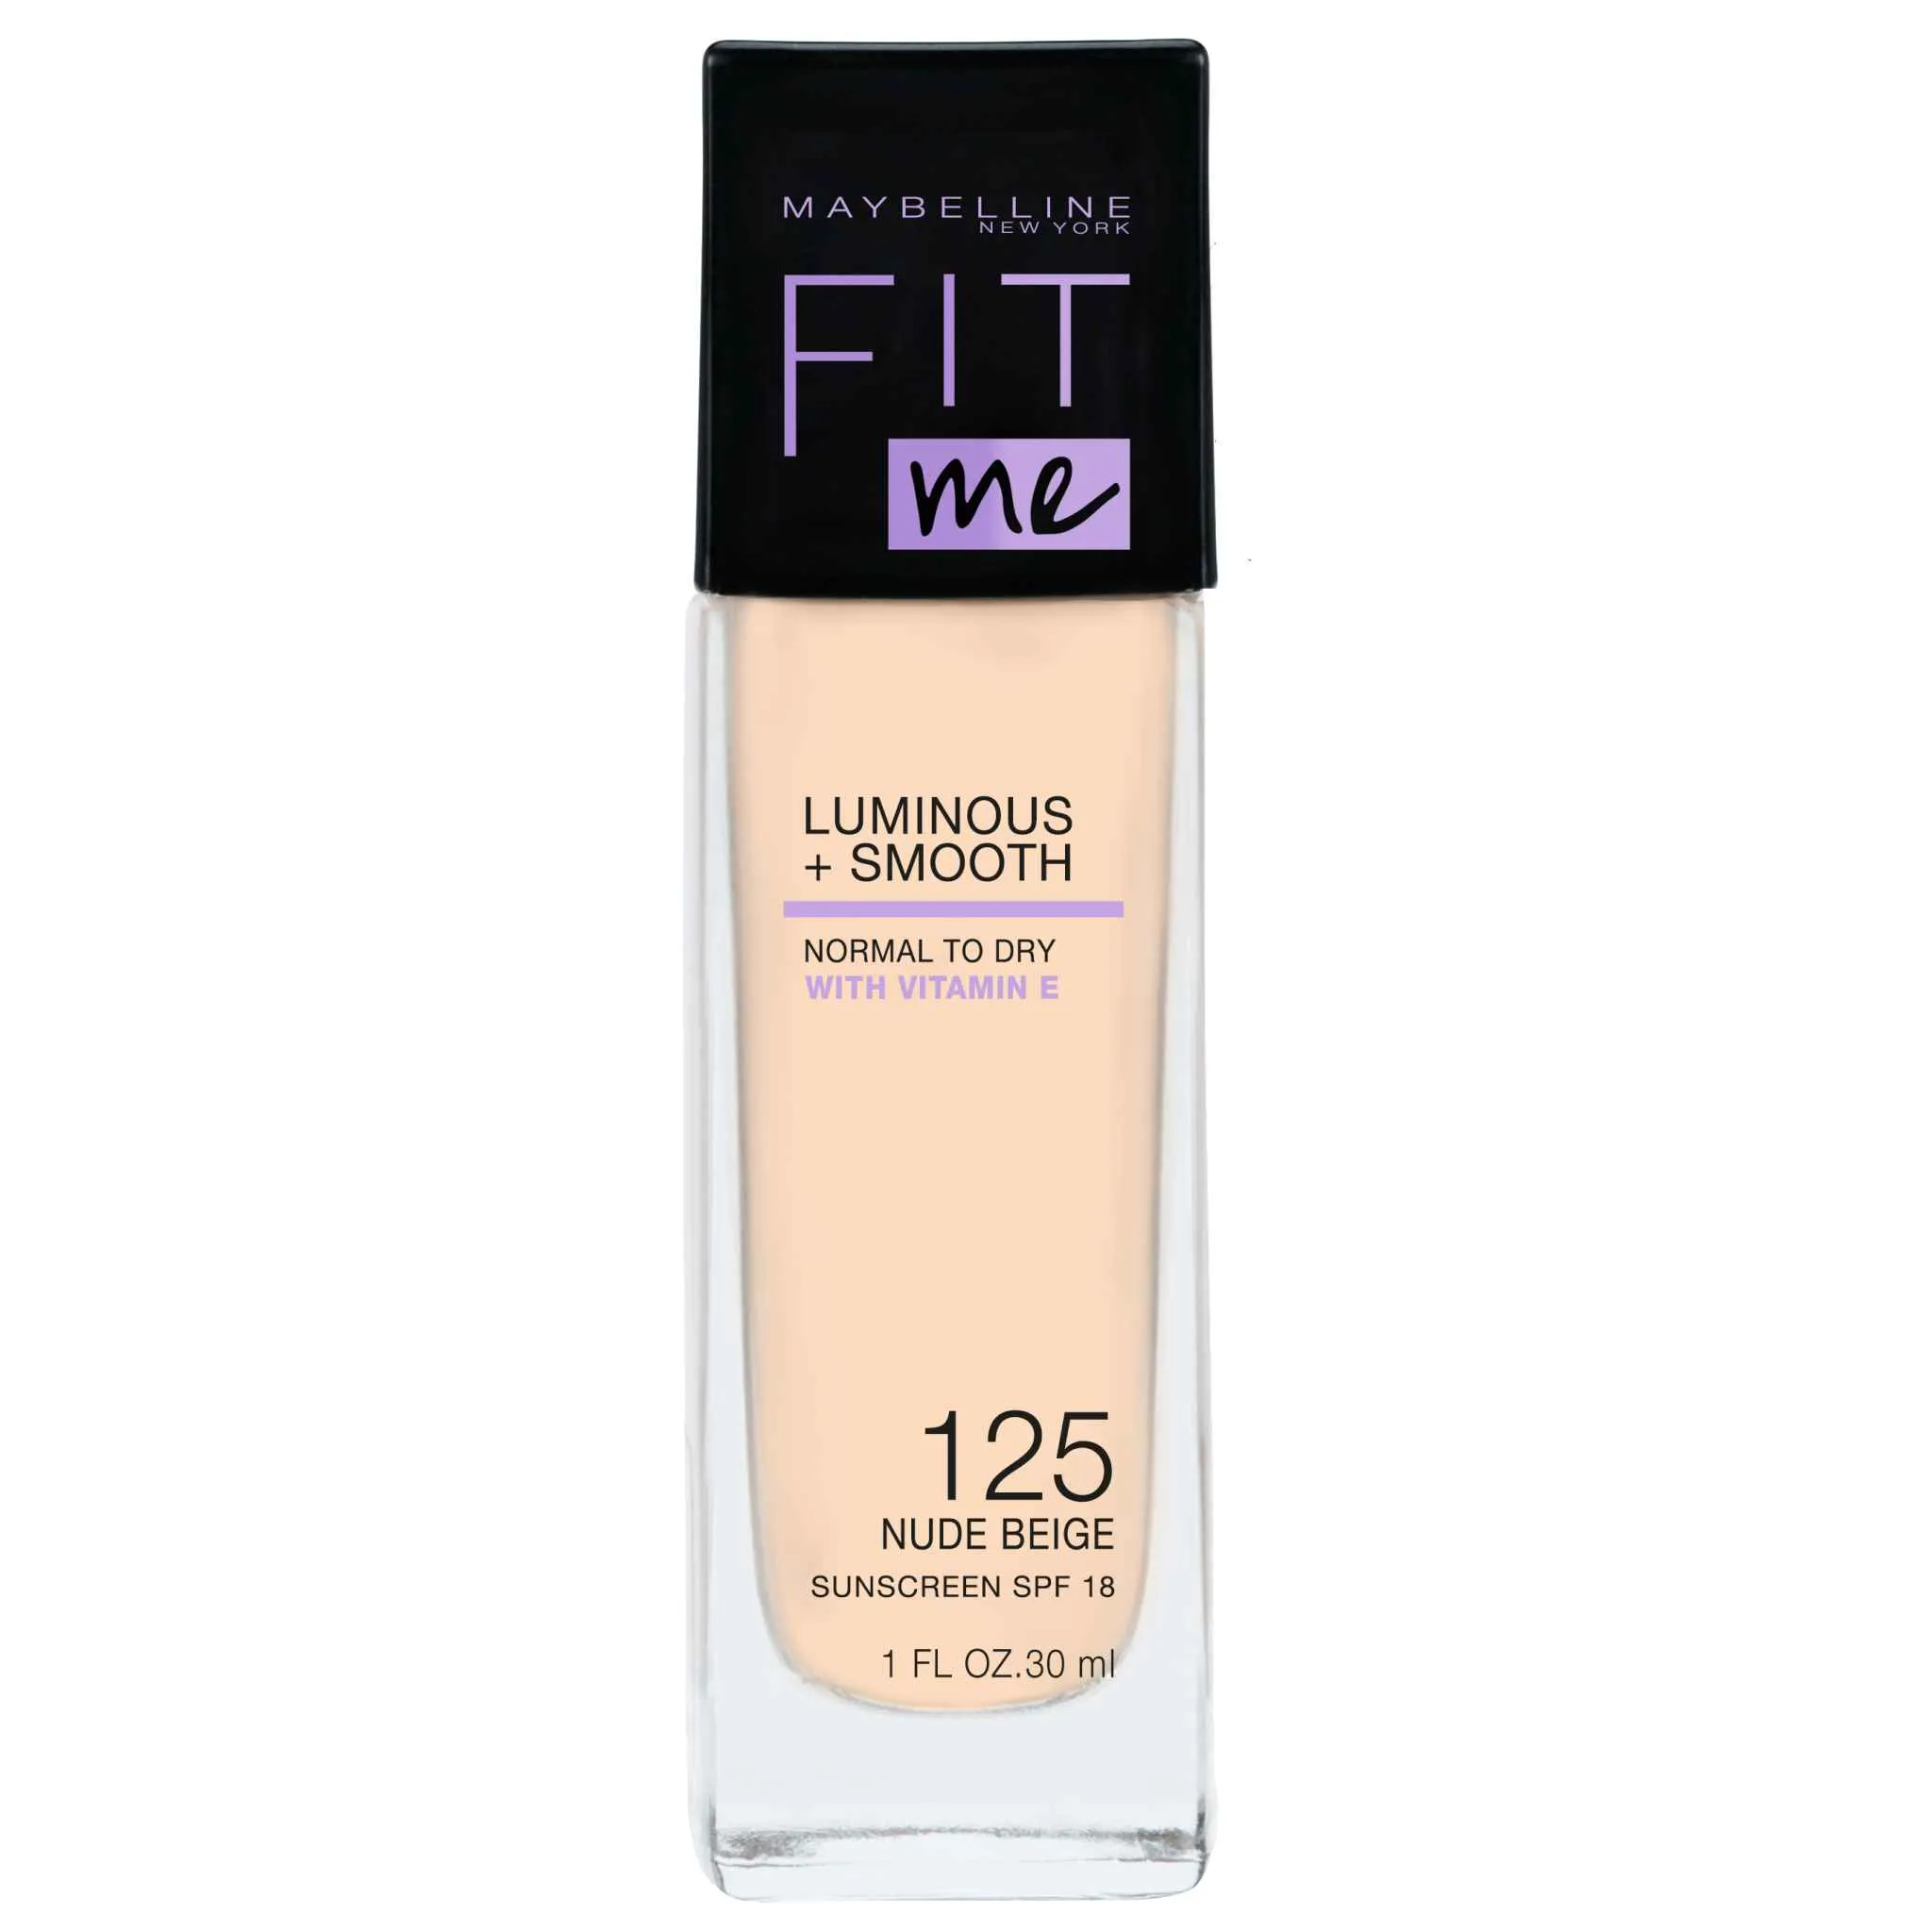 Maybelline New York Fit me Luminous + Smooth 125 Nude Beige make-up 1×30 ml, make-up